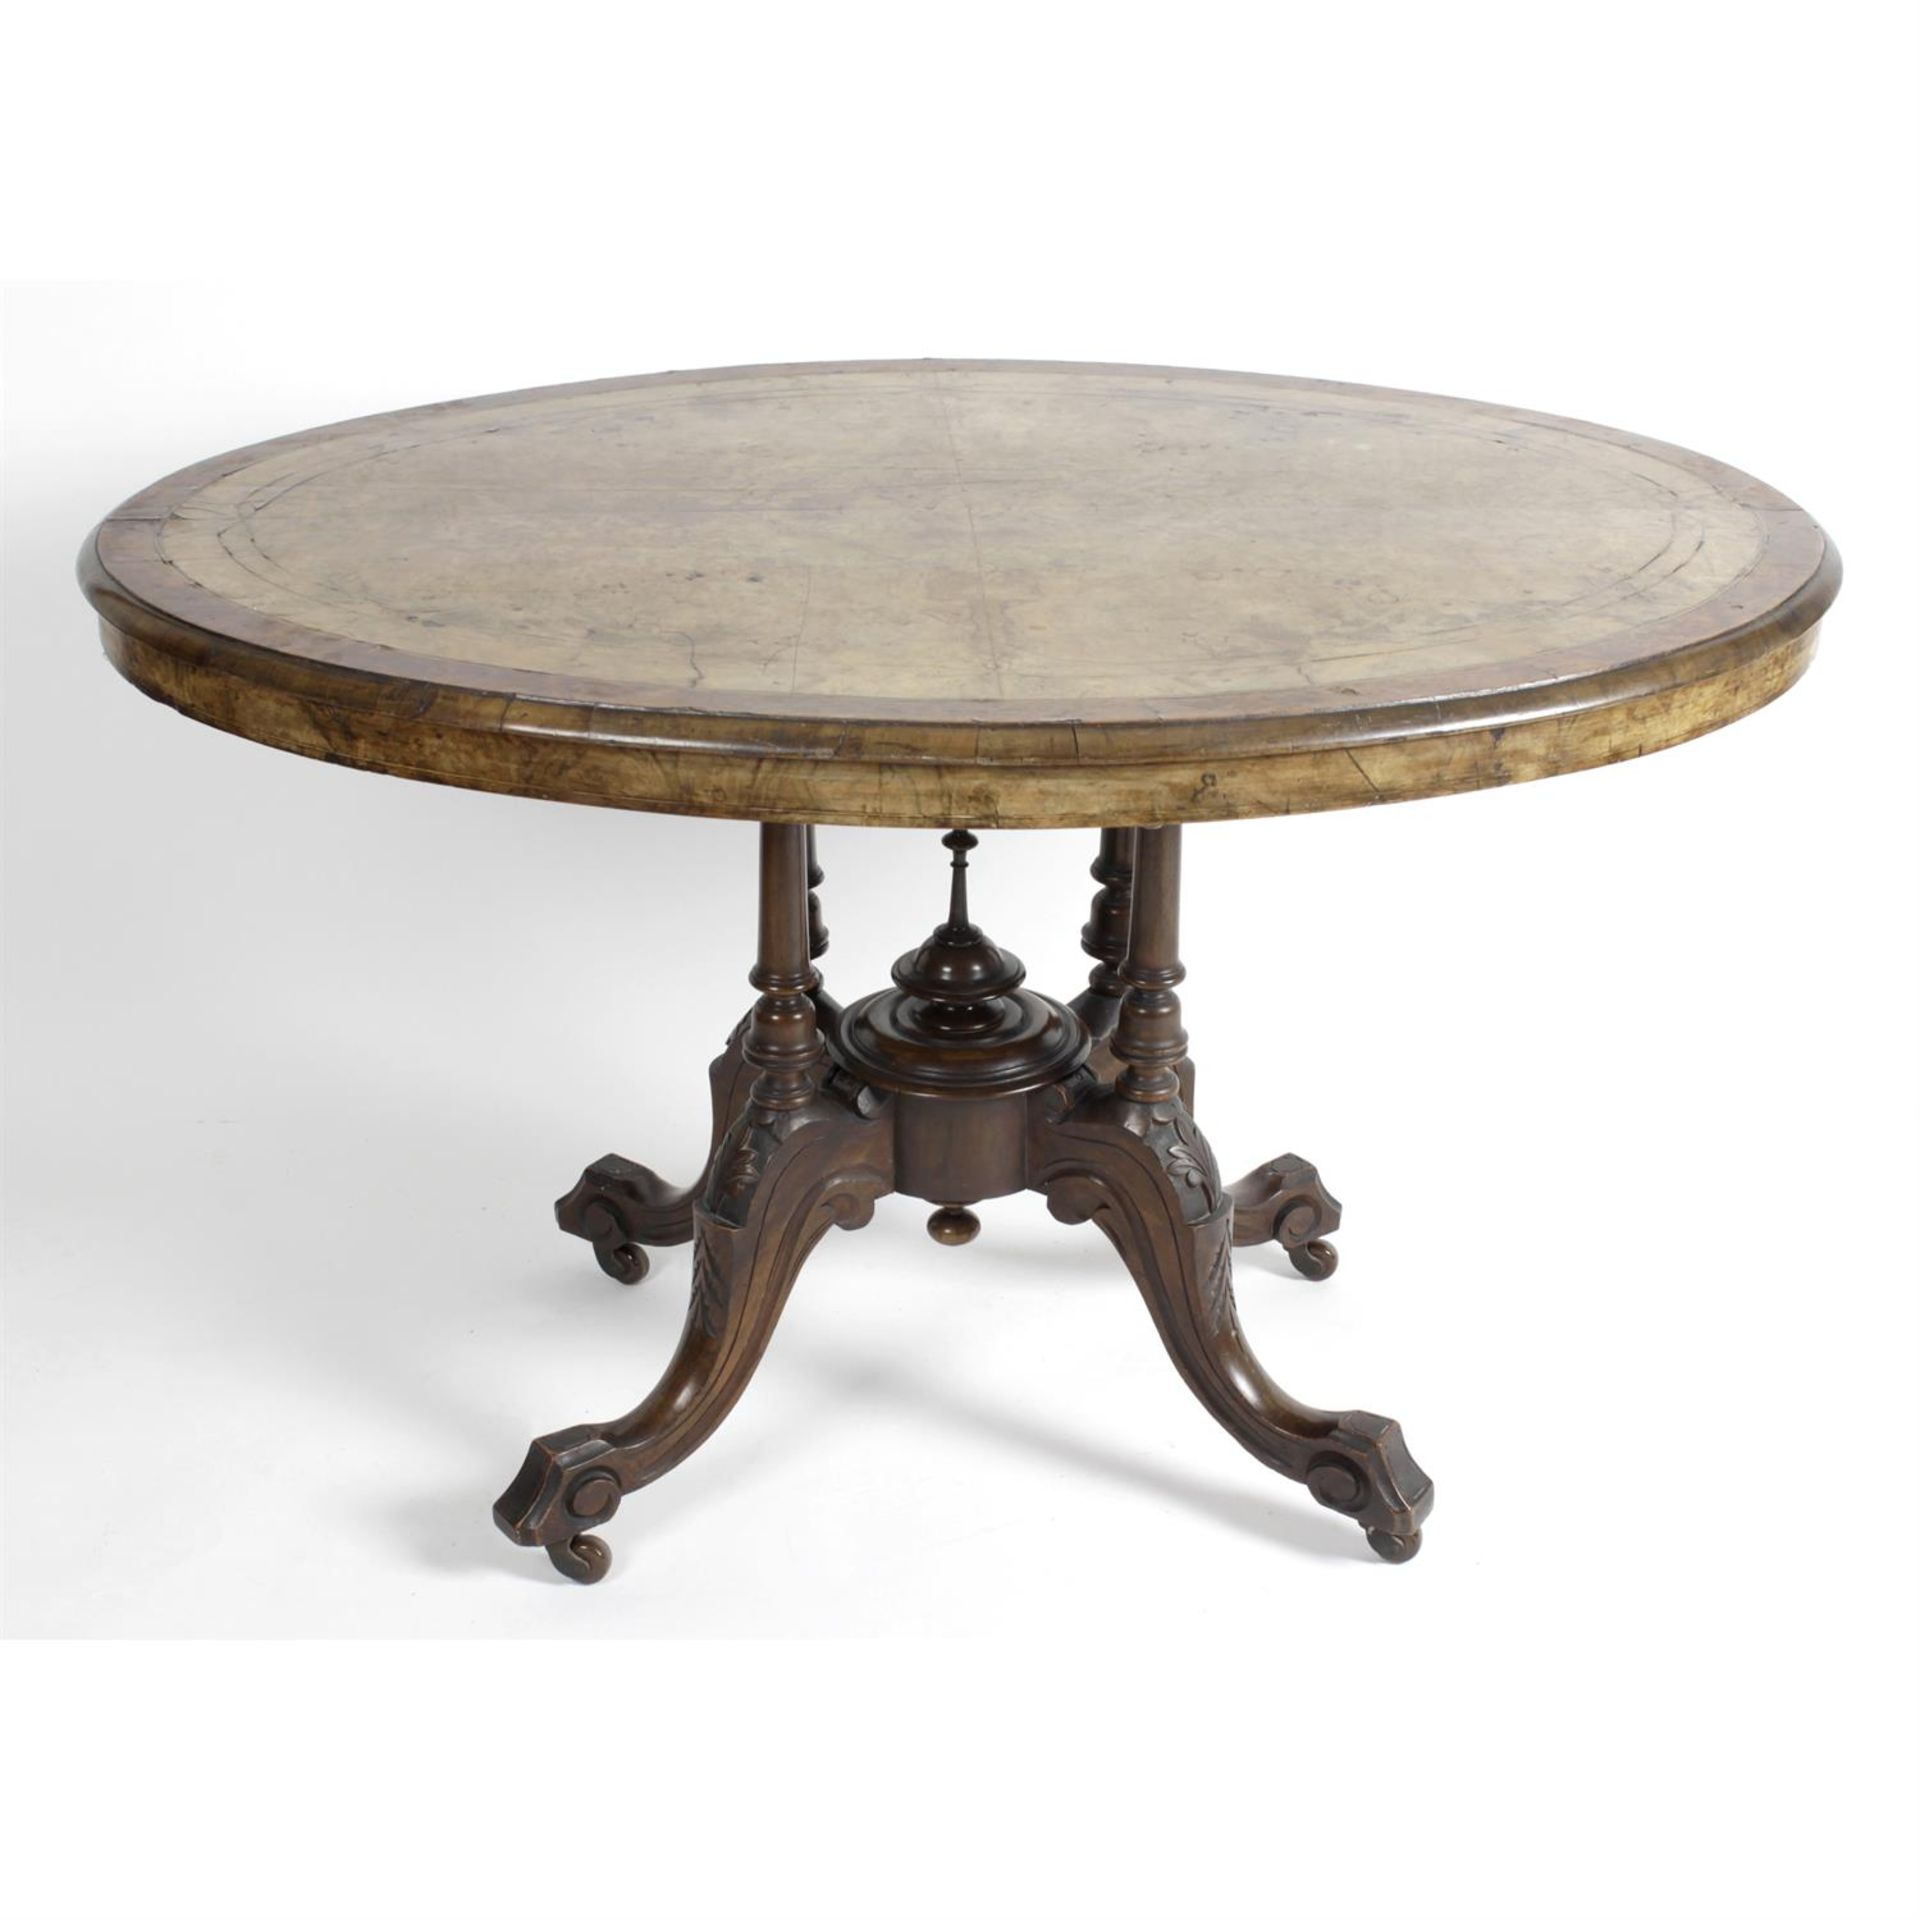 A large 19th century walnut veneered oval topped table.